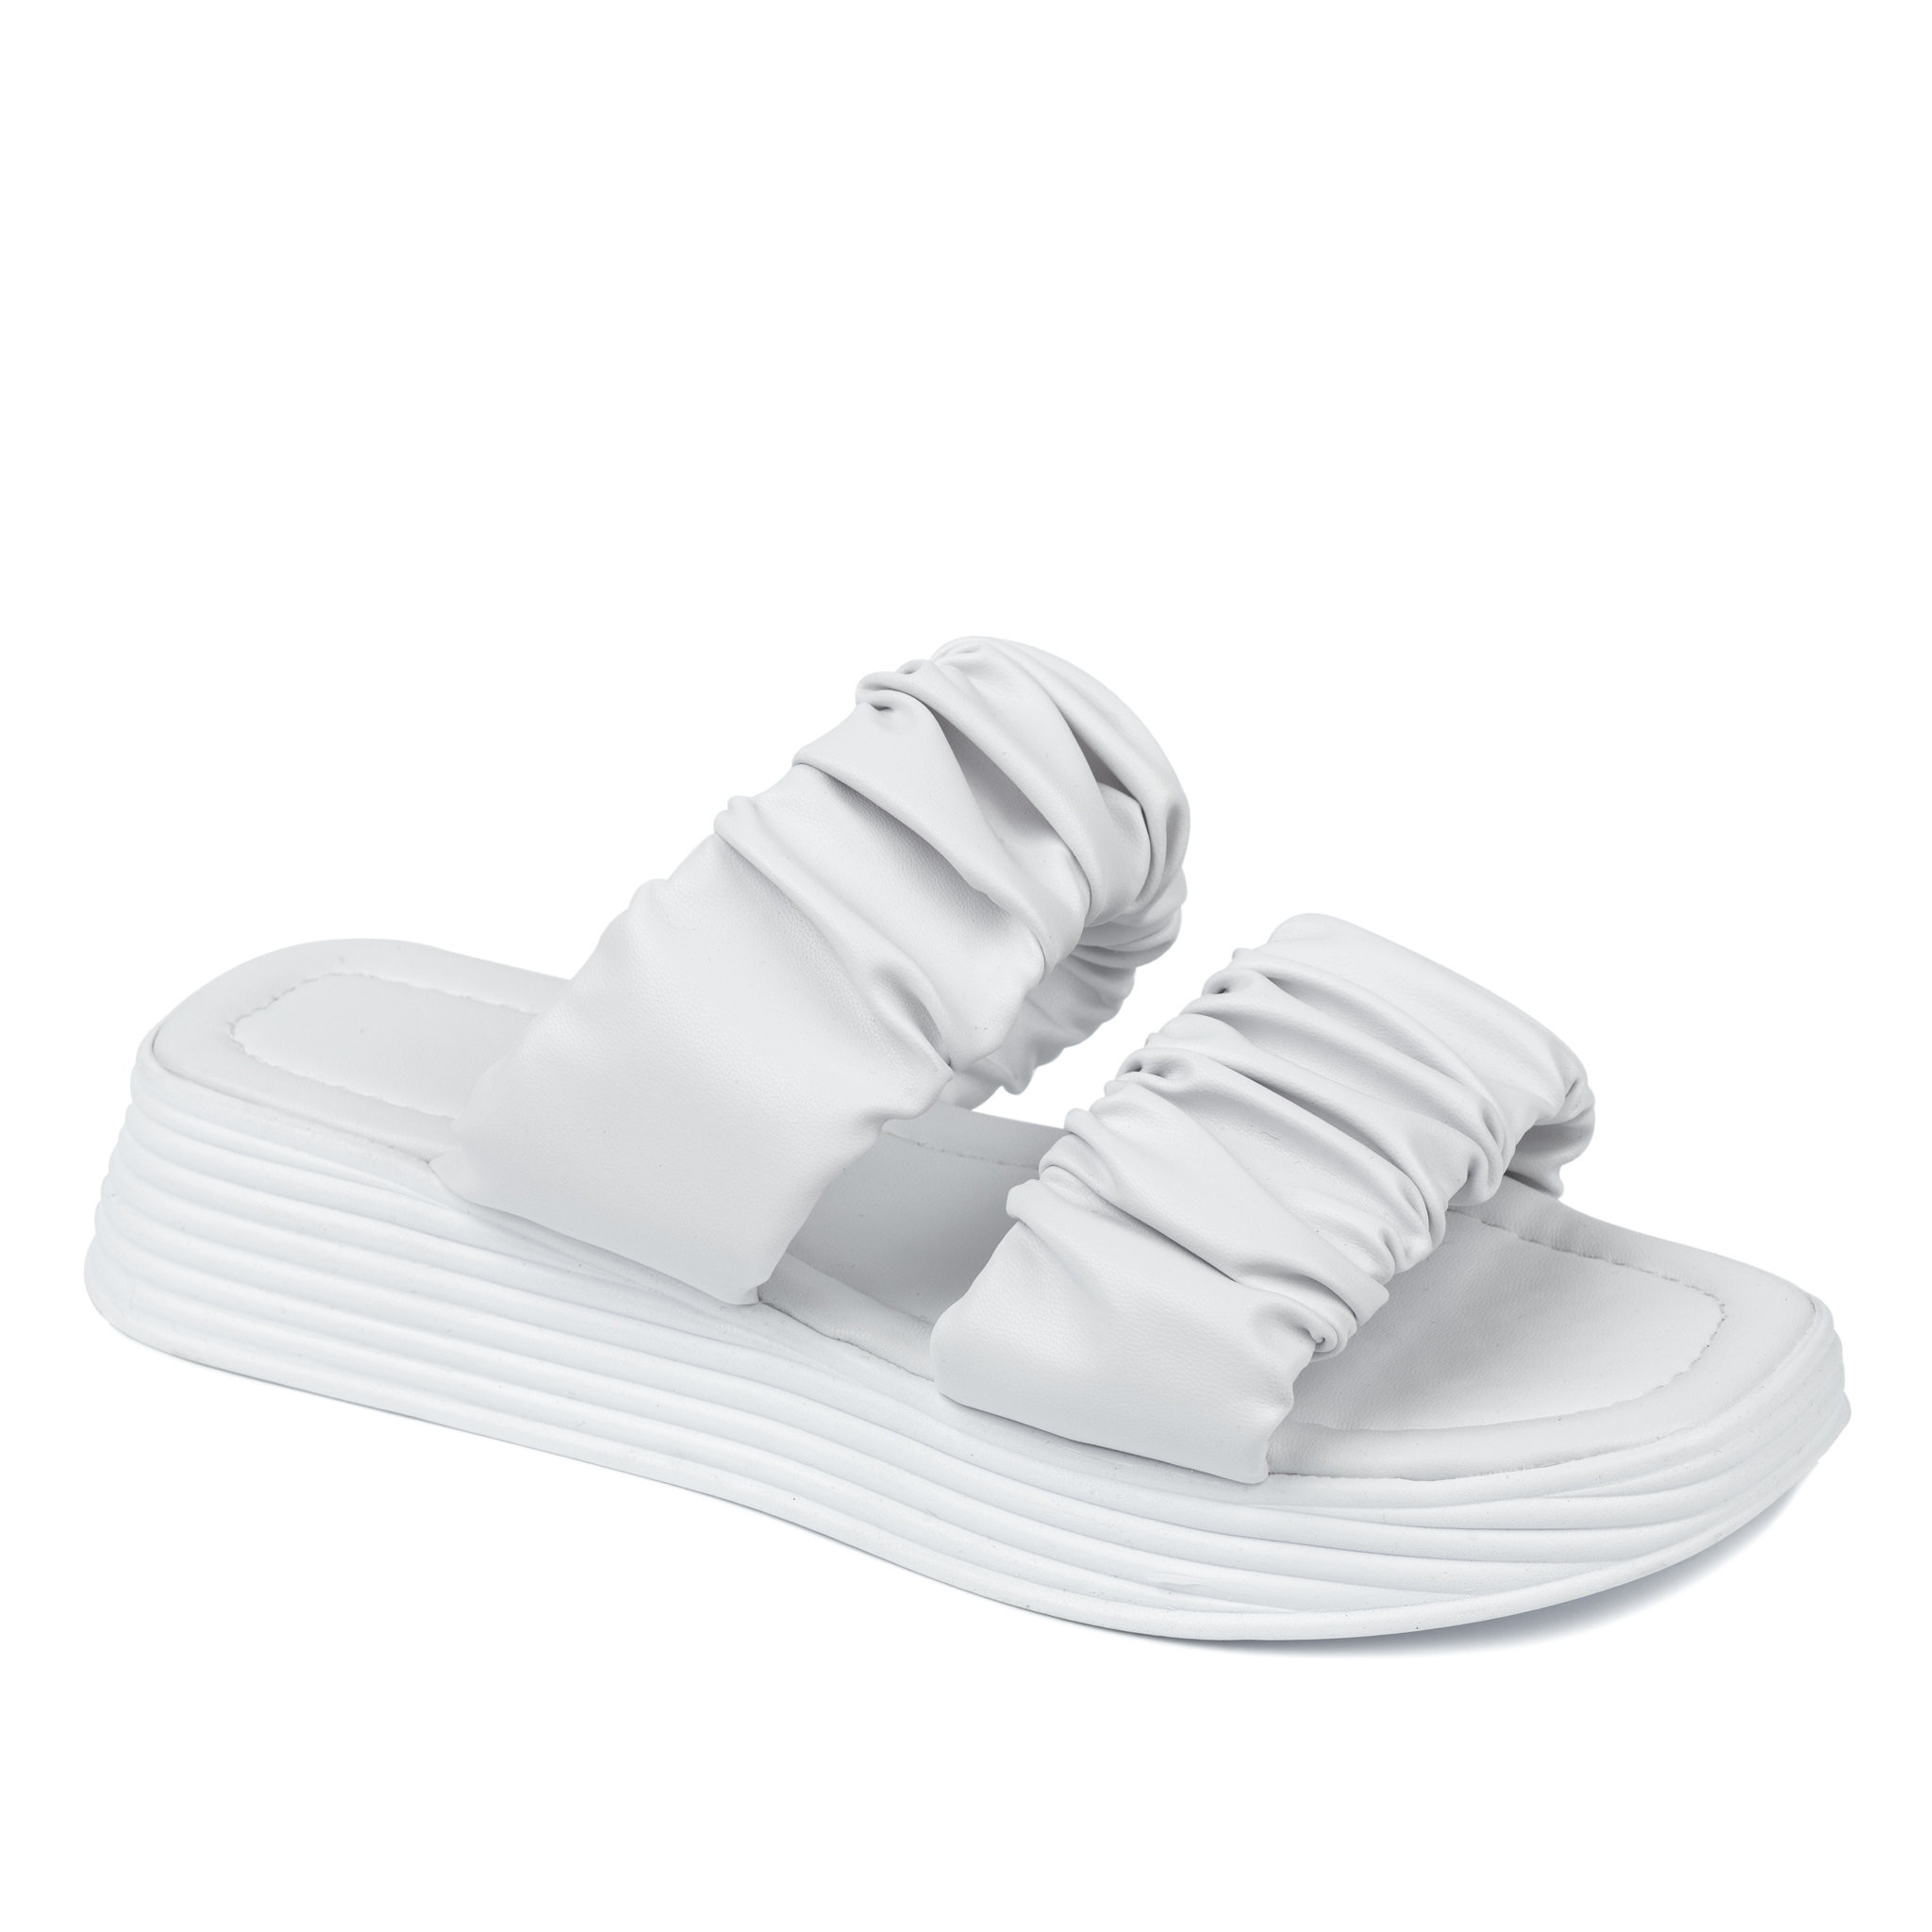 Women Slippers and Mules A430 - WHITE